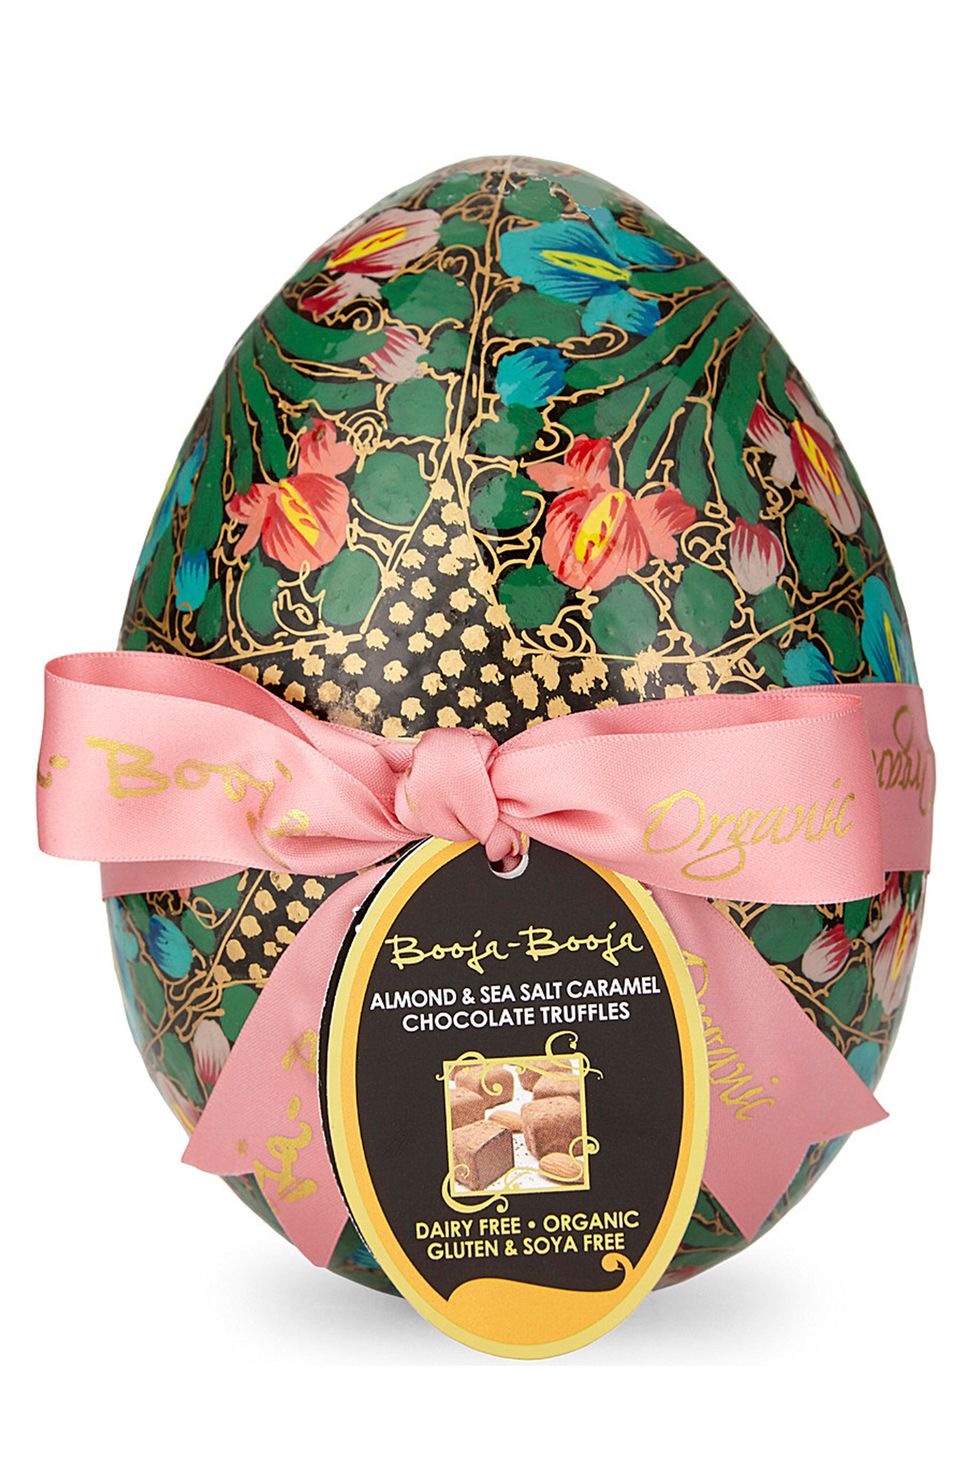 Best luxury easter eggs - Booja Booja dairy free easter egg